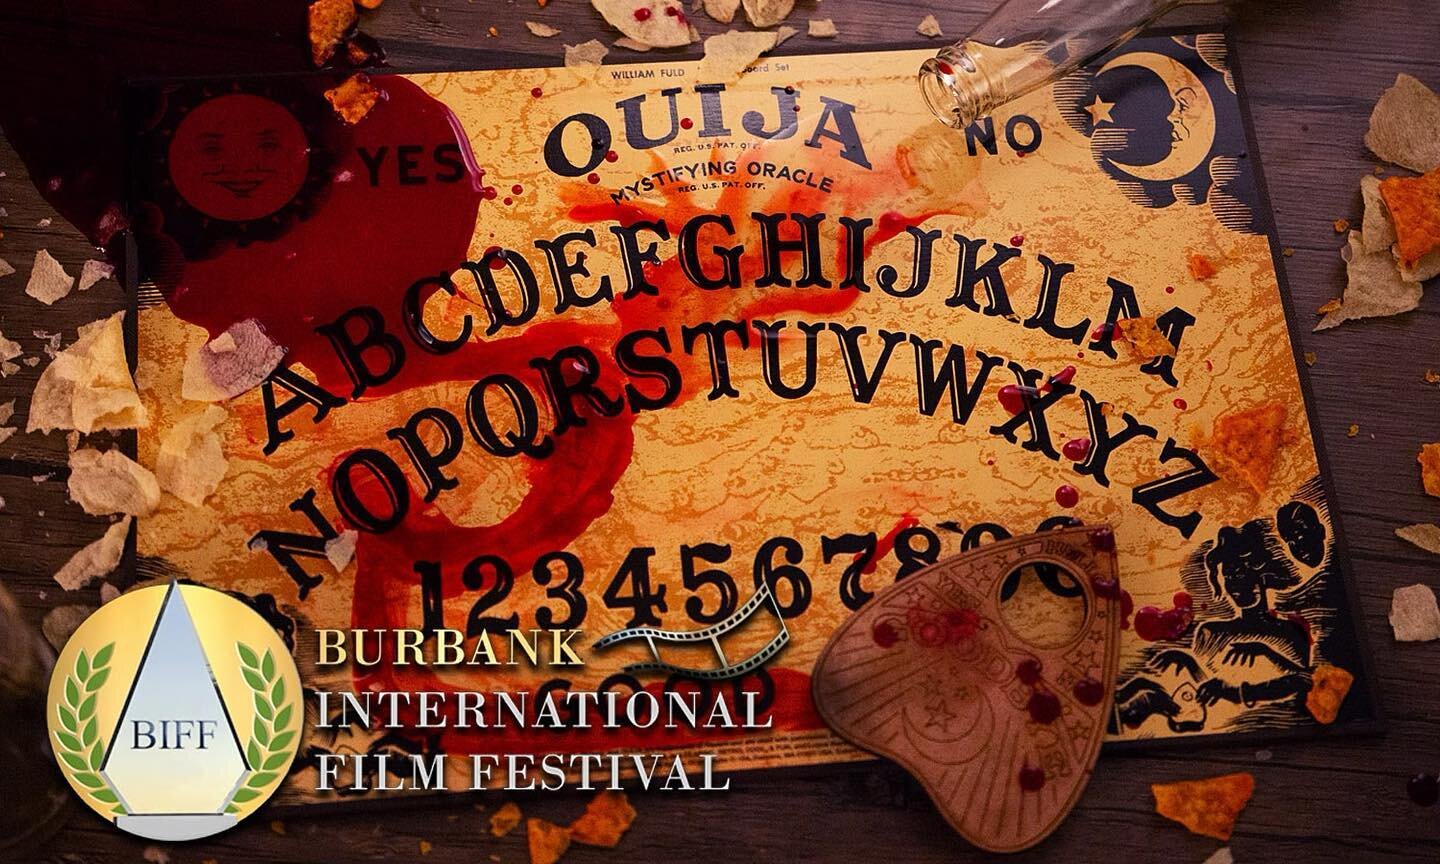 OUIJA BRO will be screening at the Burbank Film Festival this year! It&rsquo;s a special honor to be a part of this one since the first movie I ever saw in LA was at the AMC 16, the same place this film will be screening! Check my bio for tickets, th